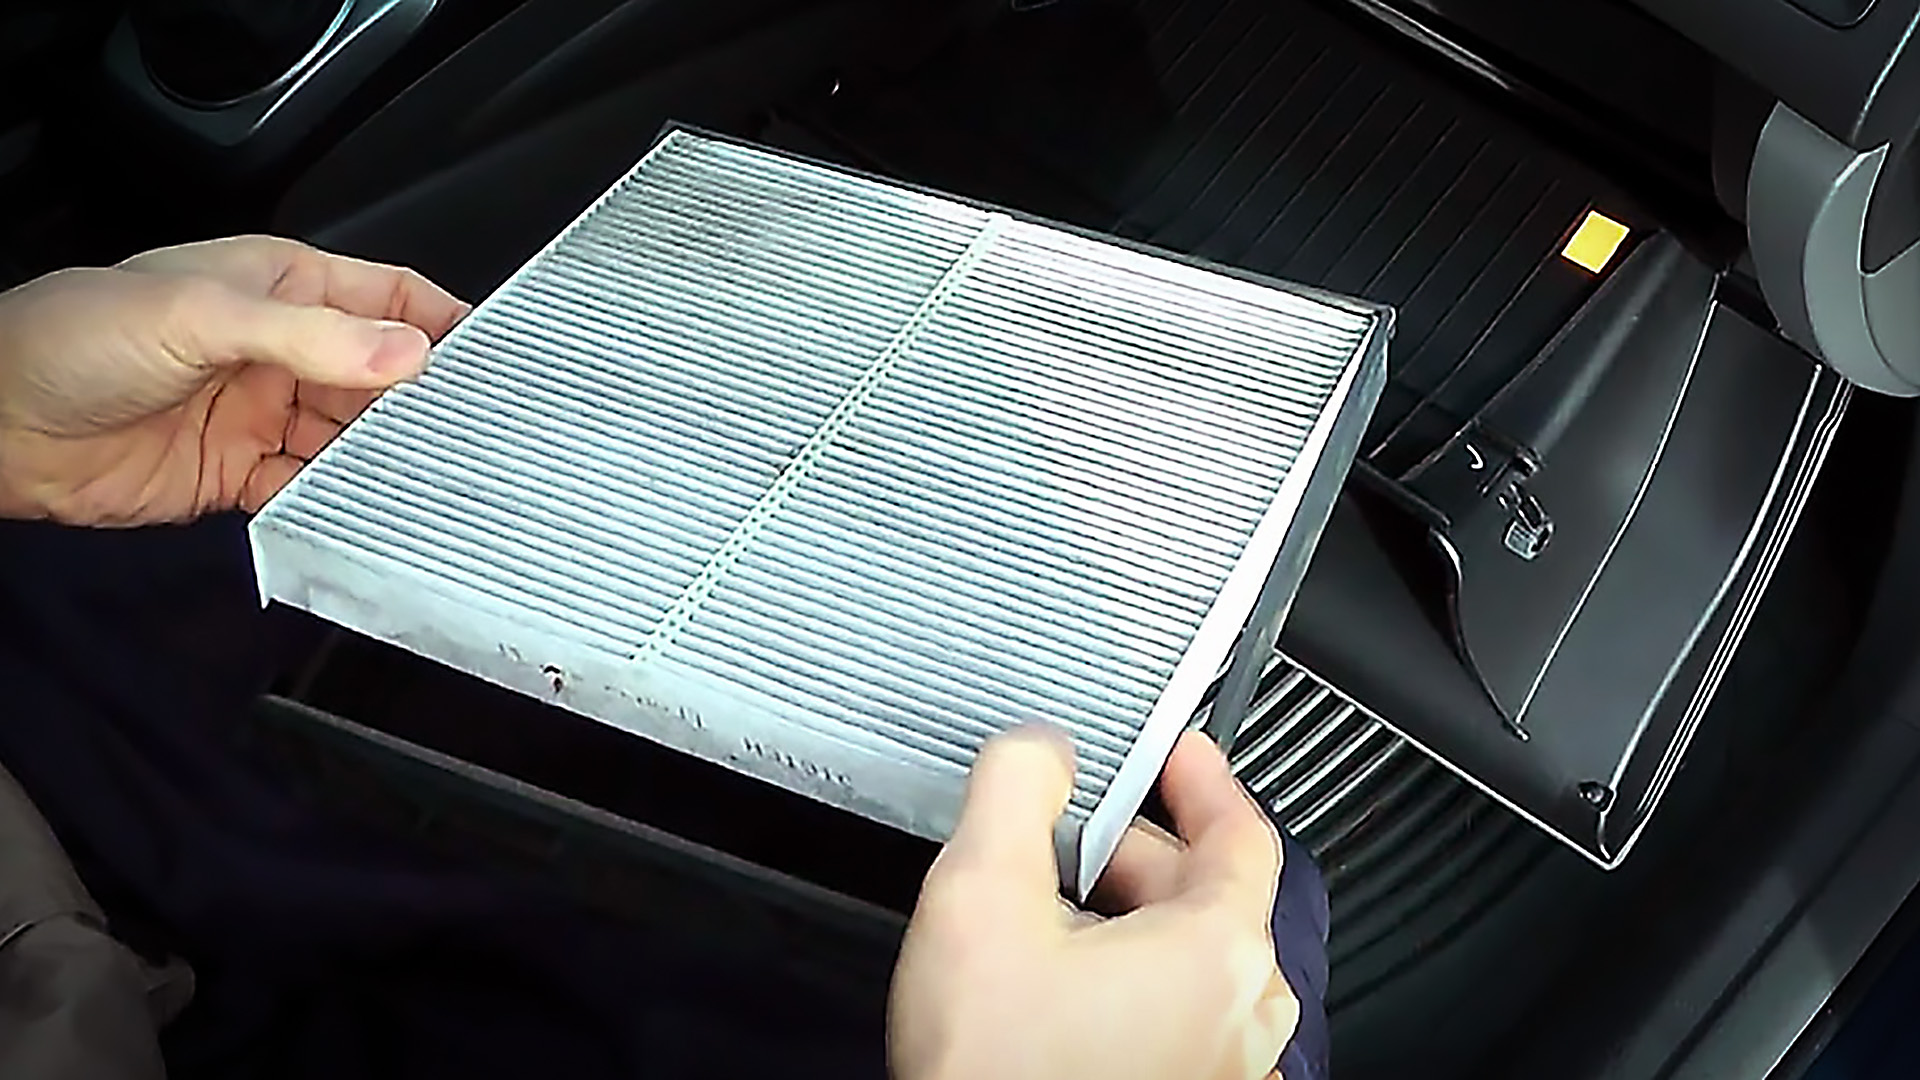 inspecting and installing a new cabin filter